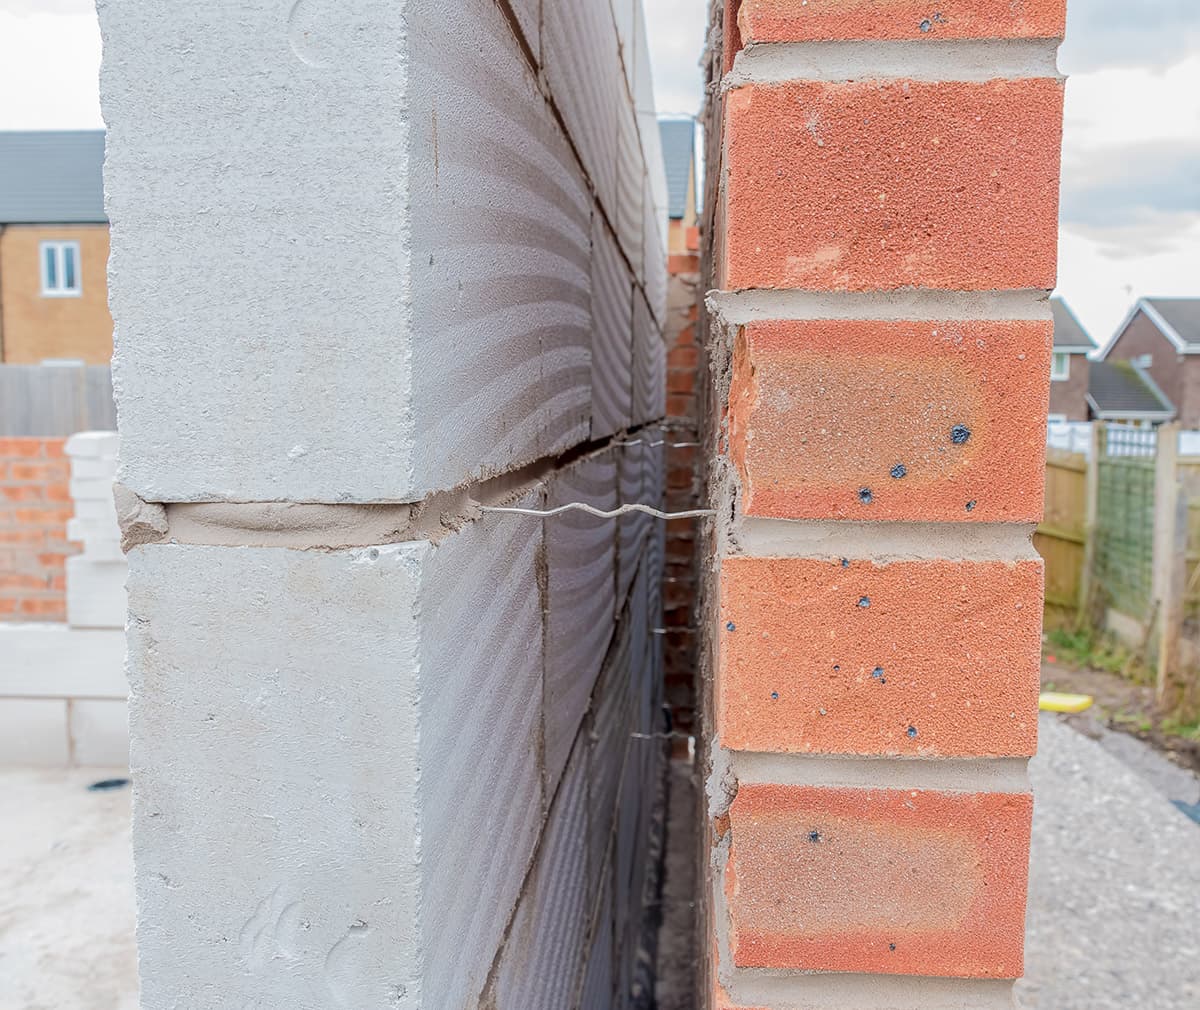 typical cavity wall ties that are prone to rust